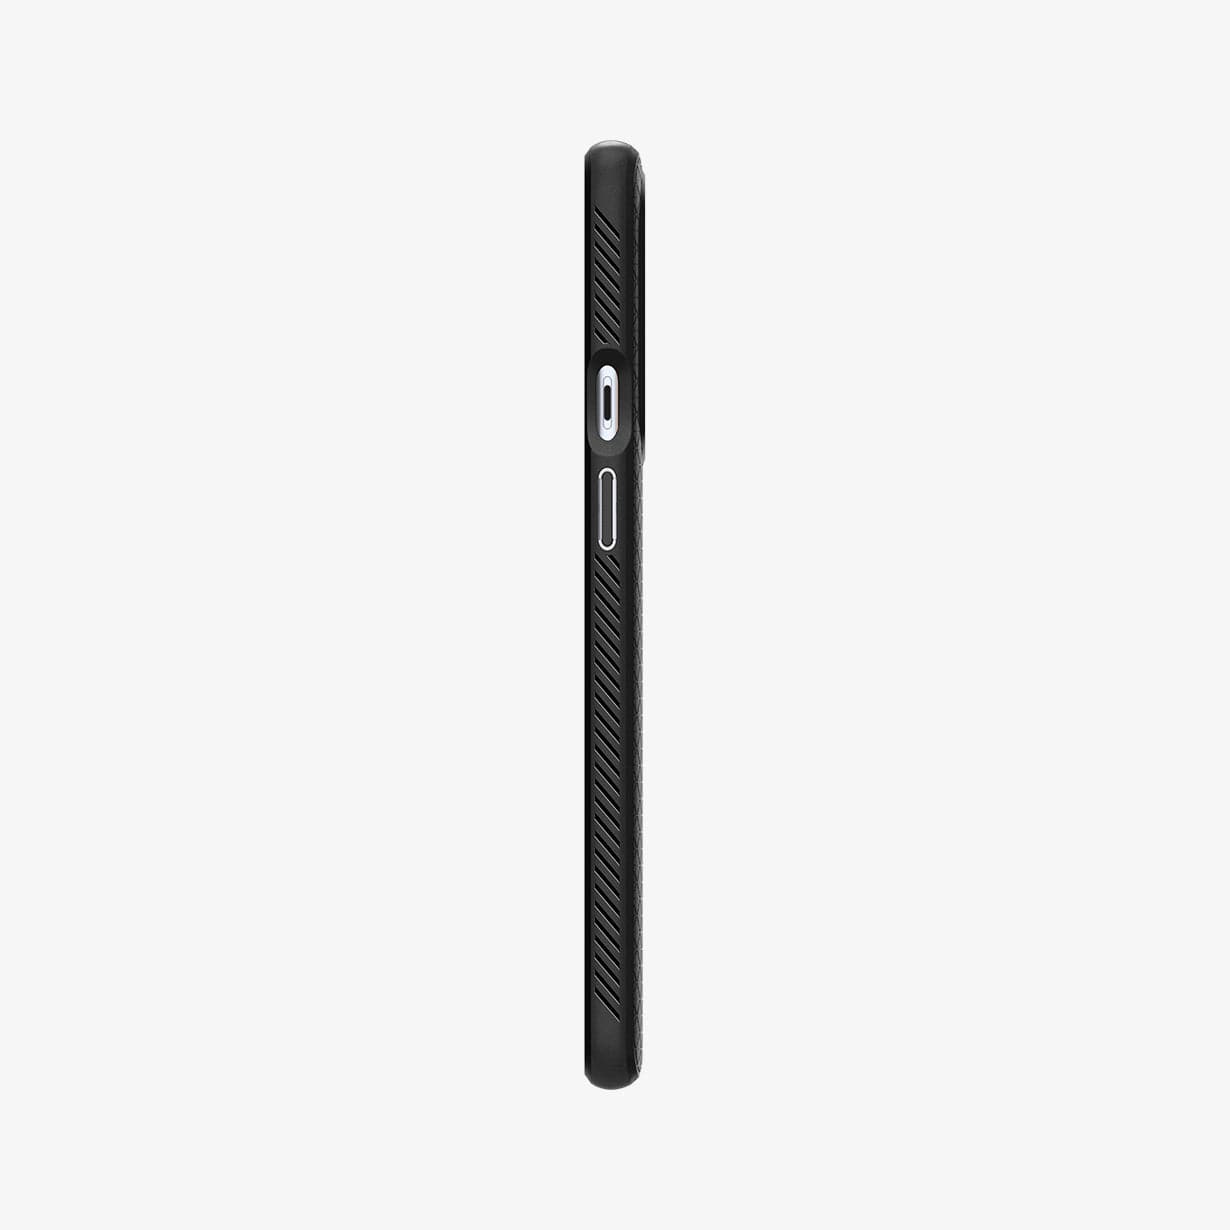 ACS02684 - OnePlus 9 5G Liquid Air Case in Matte Black showing the side